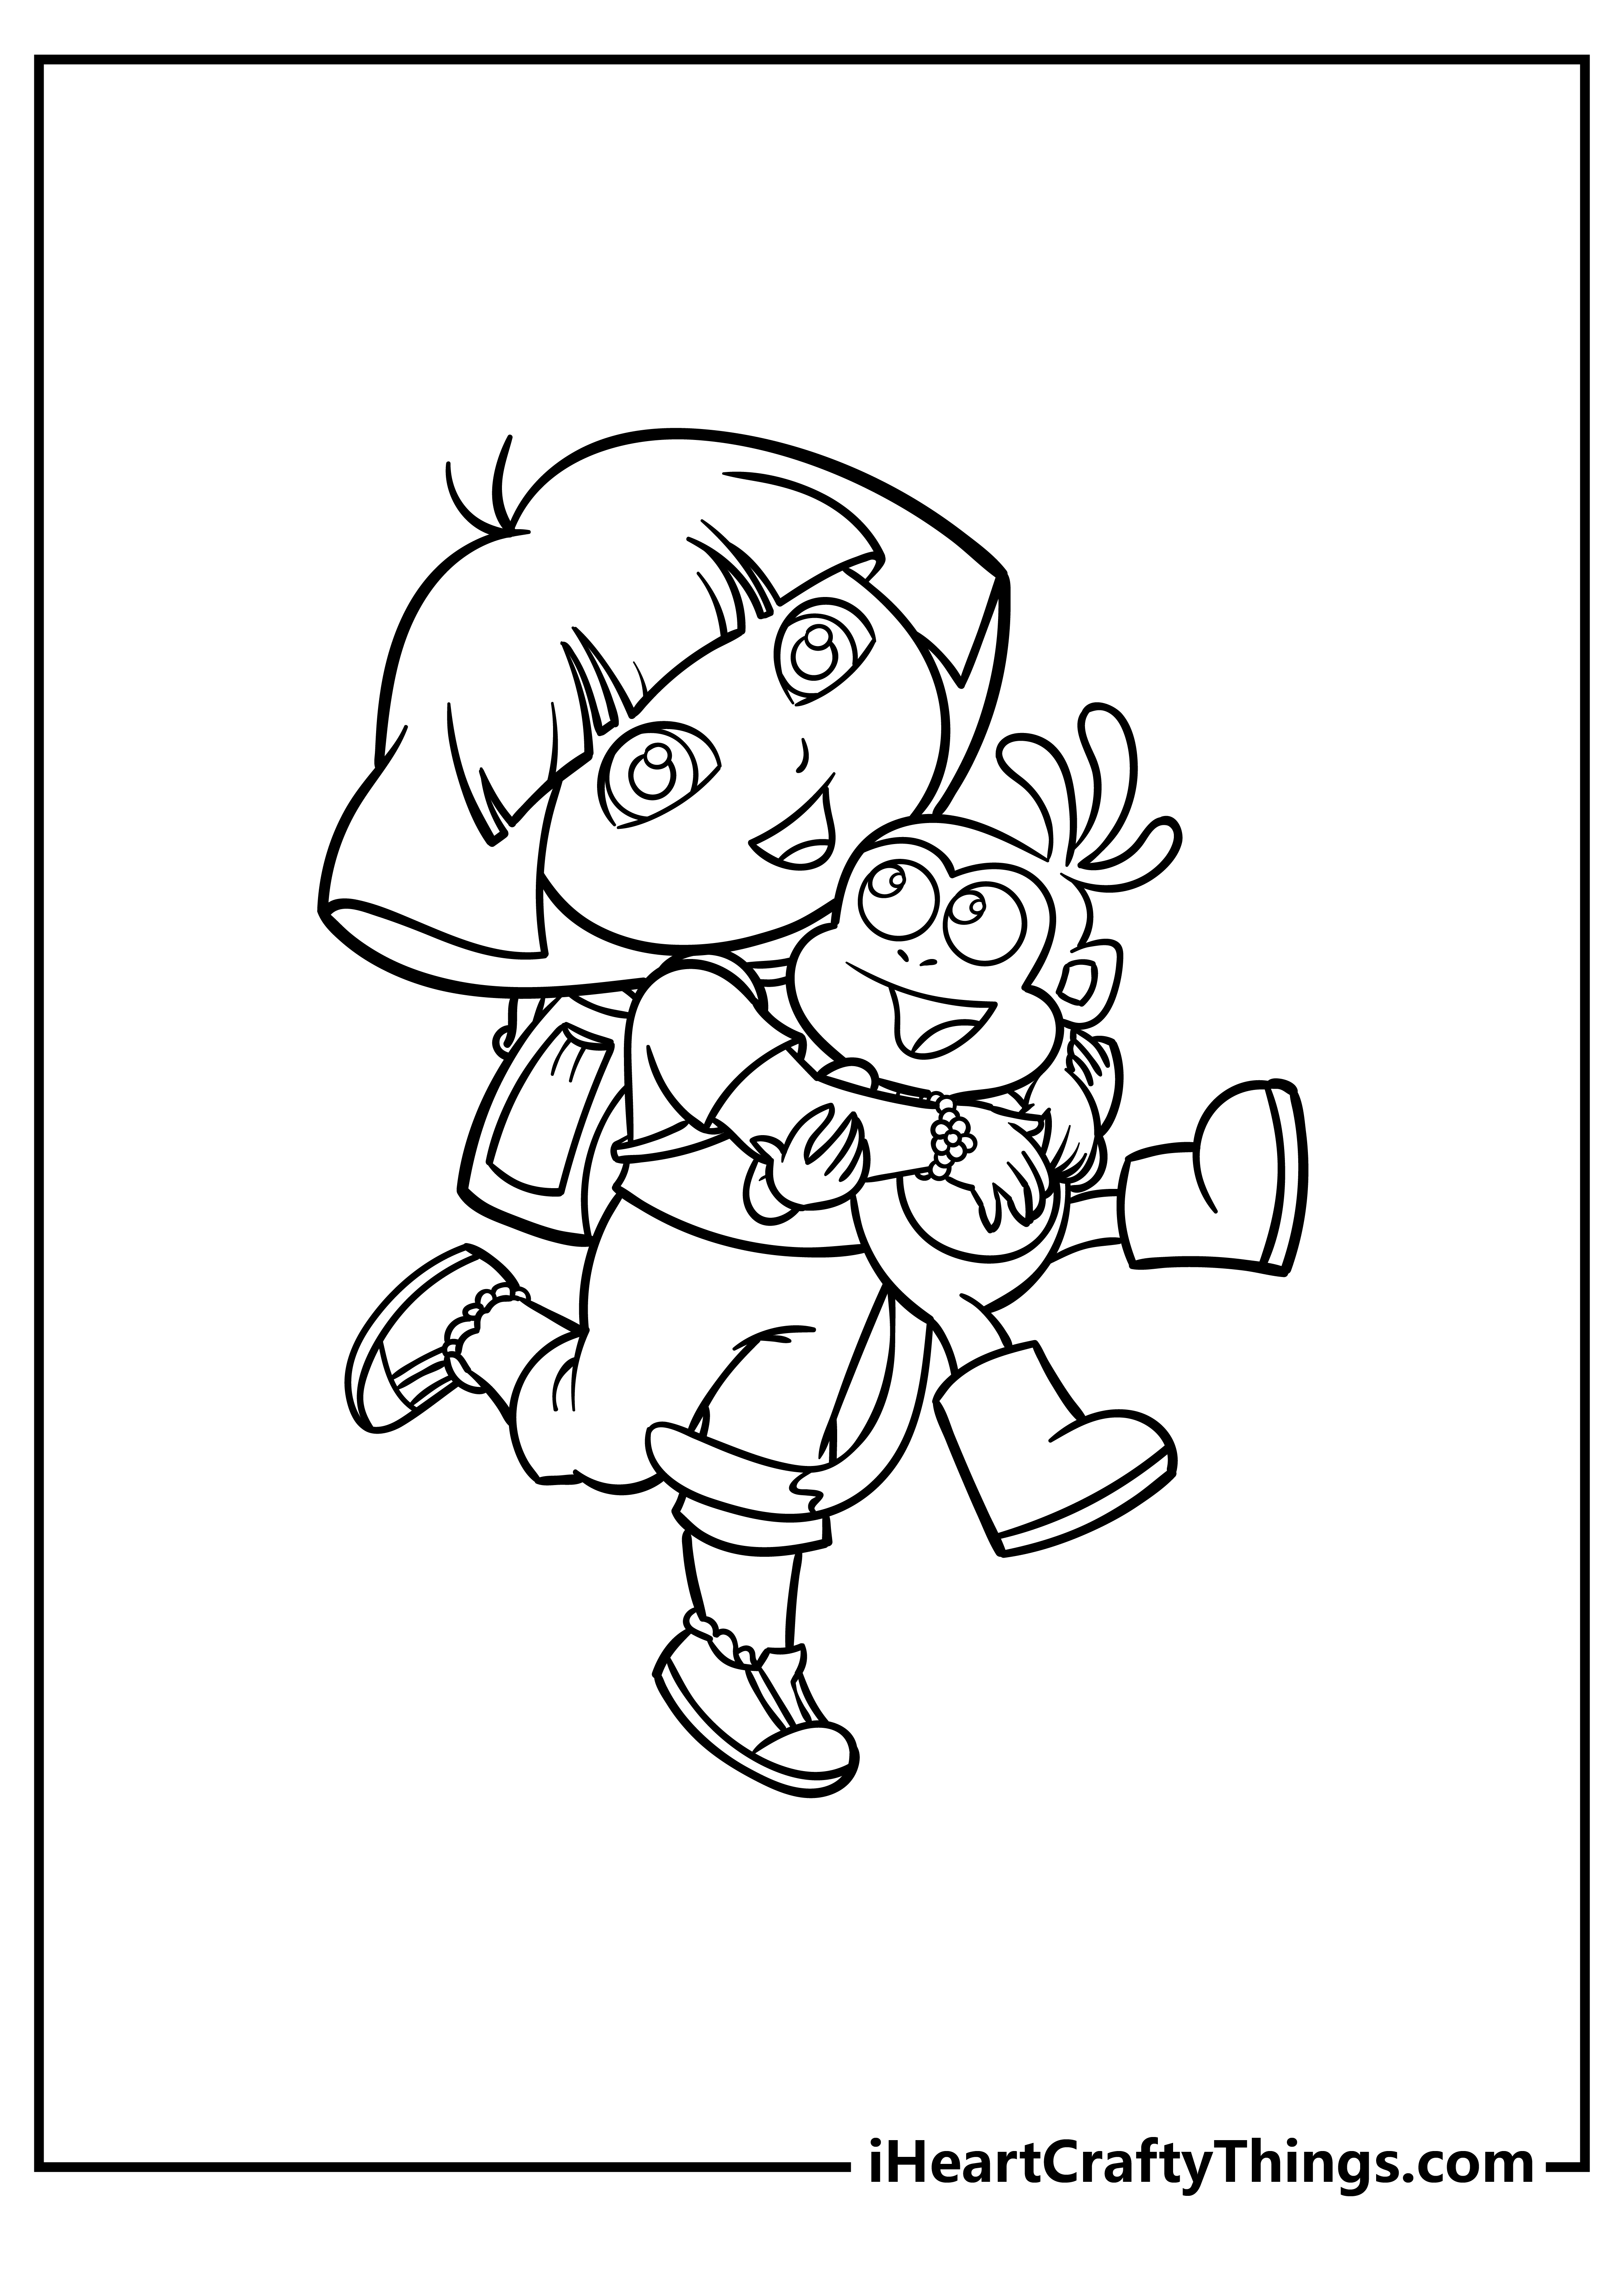 Dora Coloring Pages for preschoolers free printable